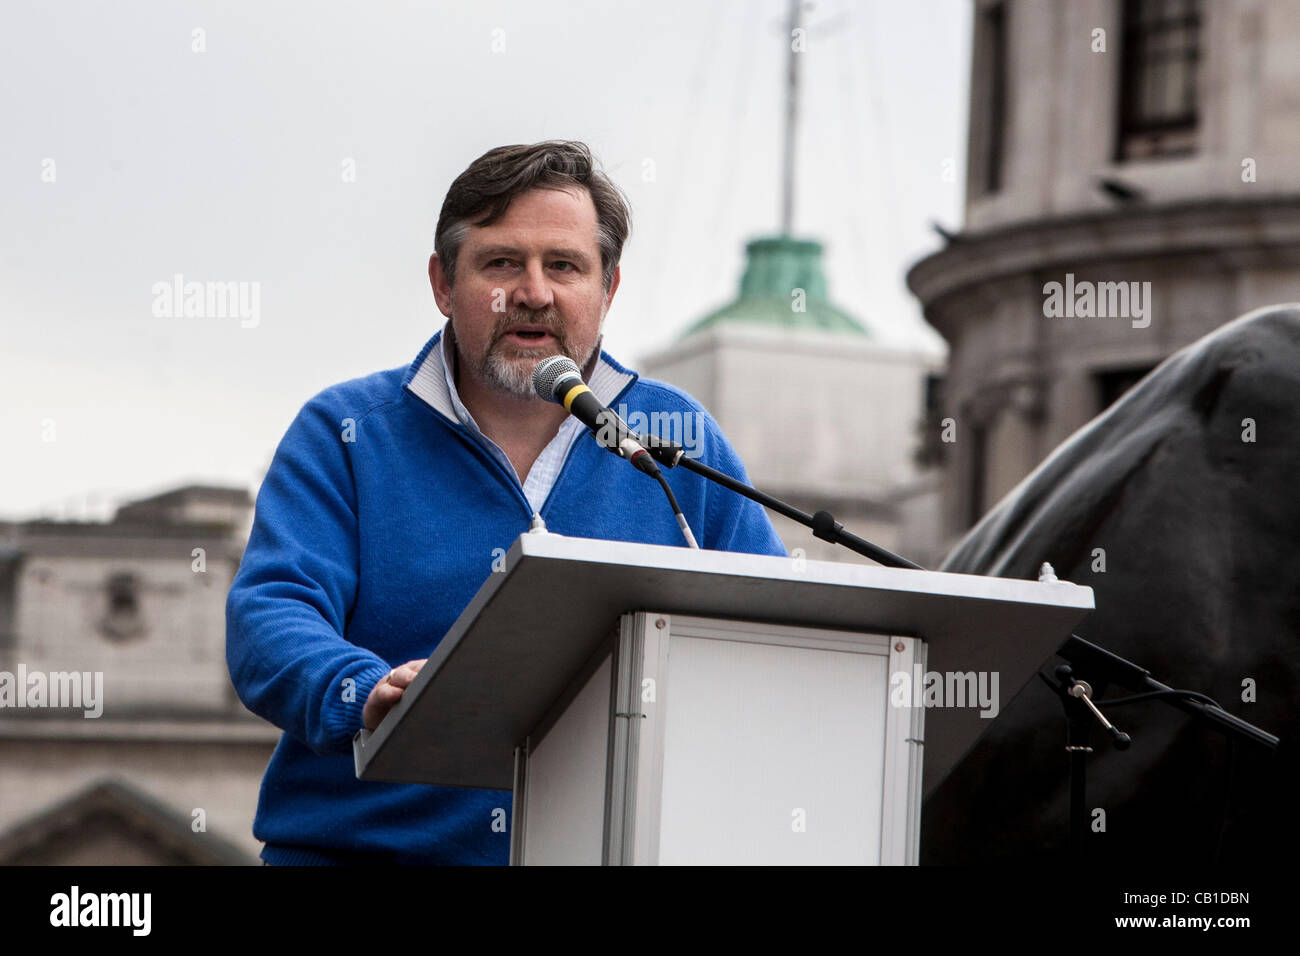 London, United Kingdom, 19/05/2012. Barry Gardiner, Labour  MP for Brent North, addressing the Tamil Rally in support of their demands to bring the people responsible for war crimes to justice. Stock Photo